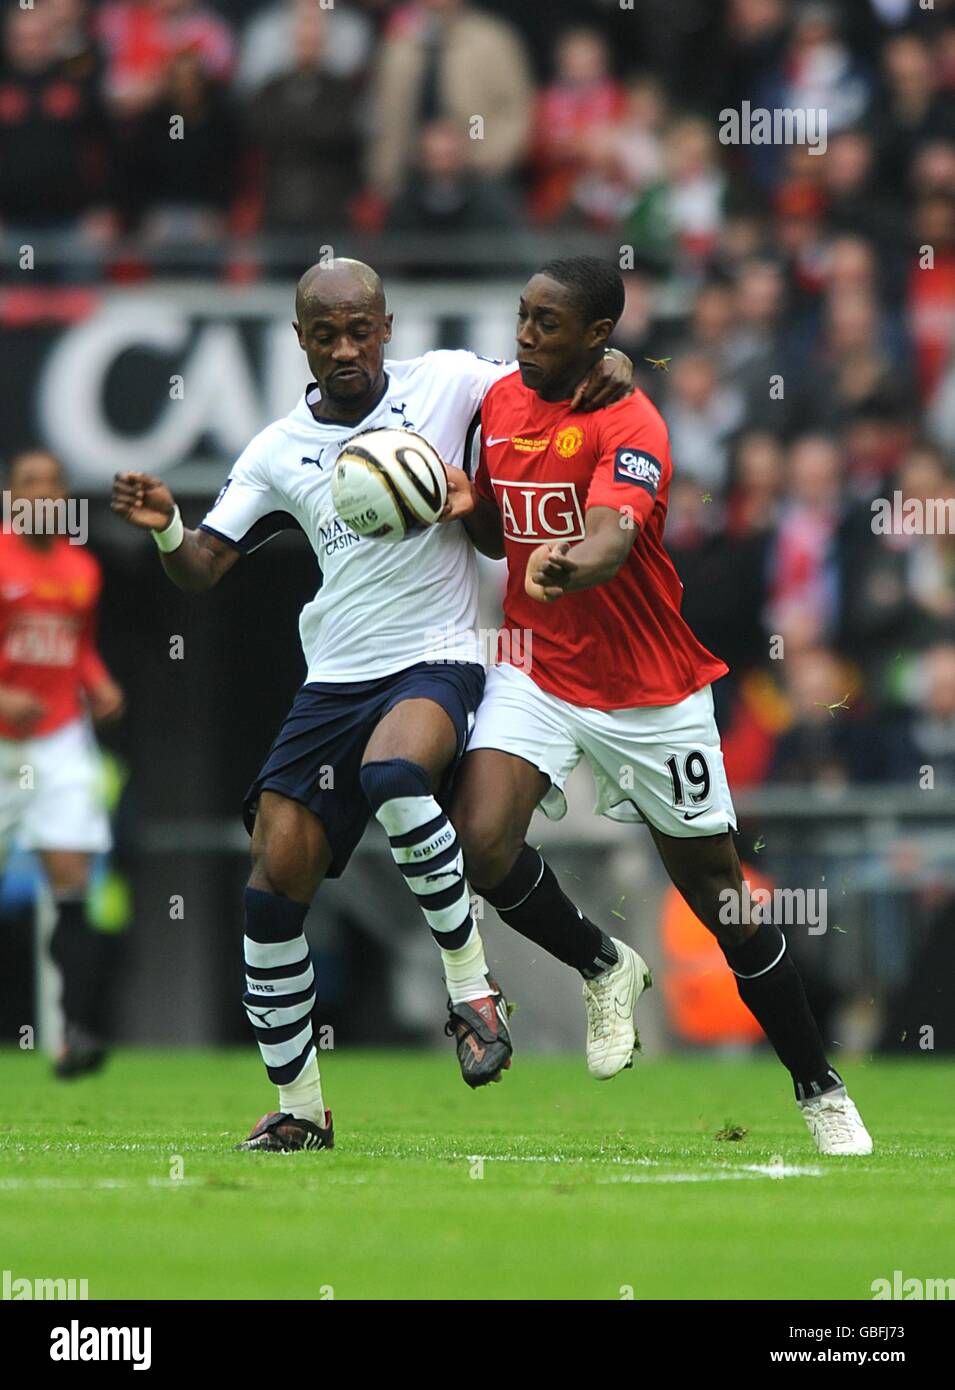 Soccer - Carling Cup - Final - Manchester United v Tottenham Hotspur - Wembley Stadium. Tottenham Hotspur's Didier Zokora (left) and Manchester United's Danny Welbeck (right) battle for the ball Stock Photo